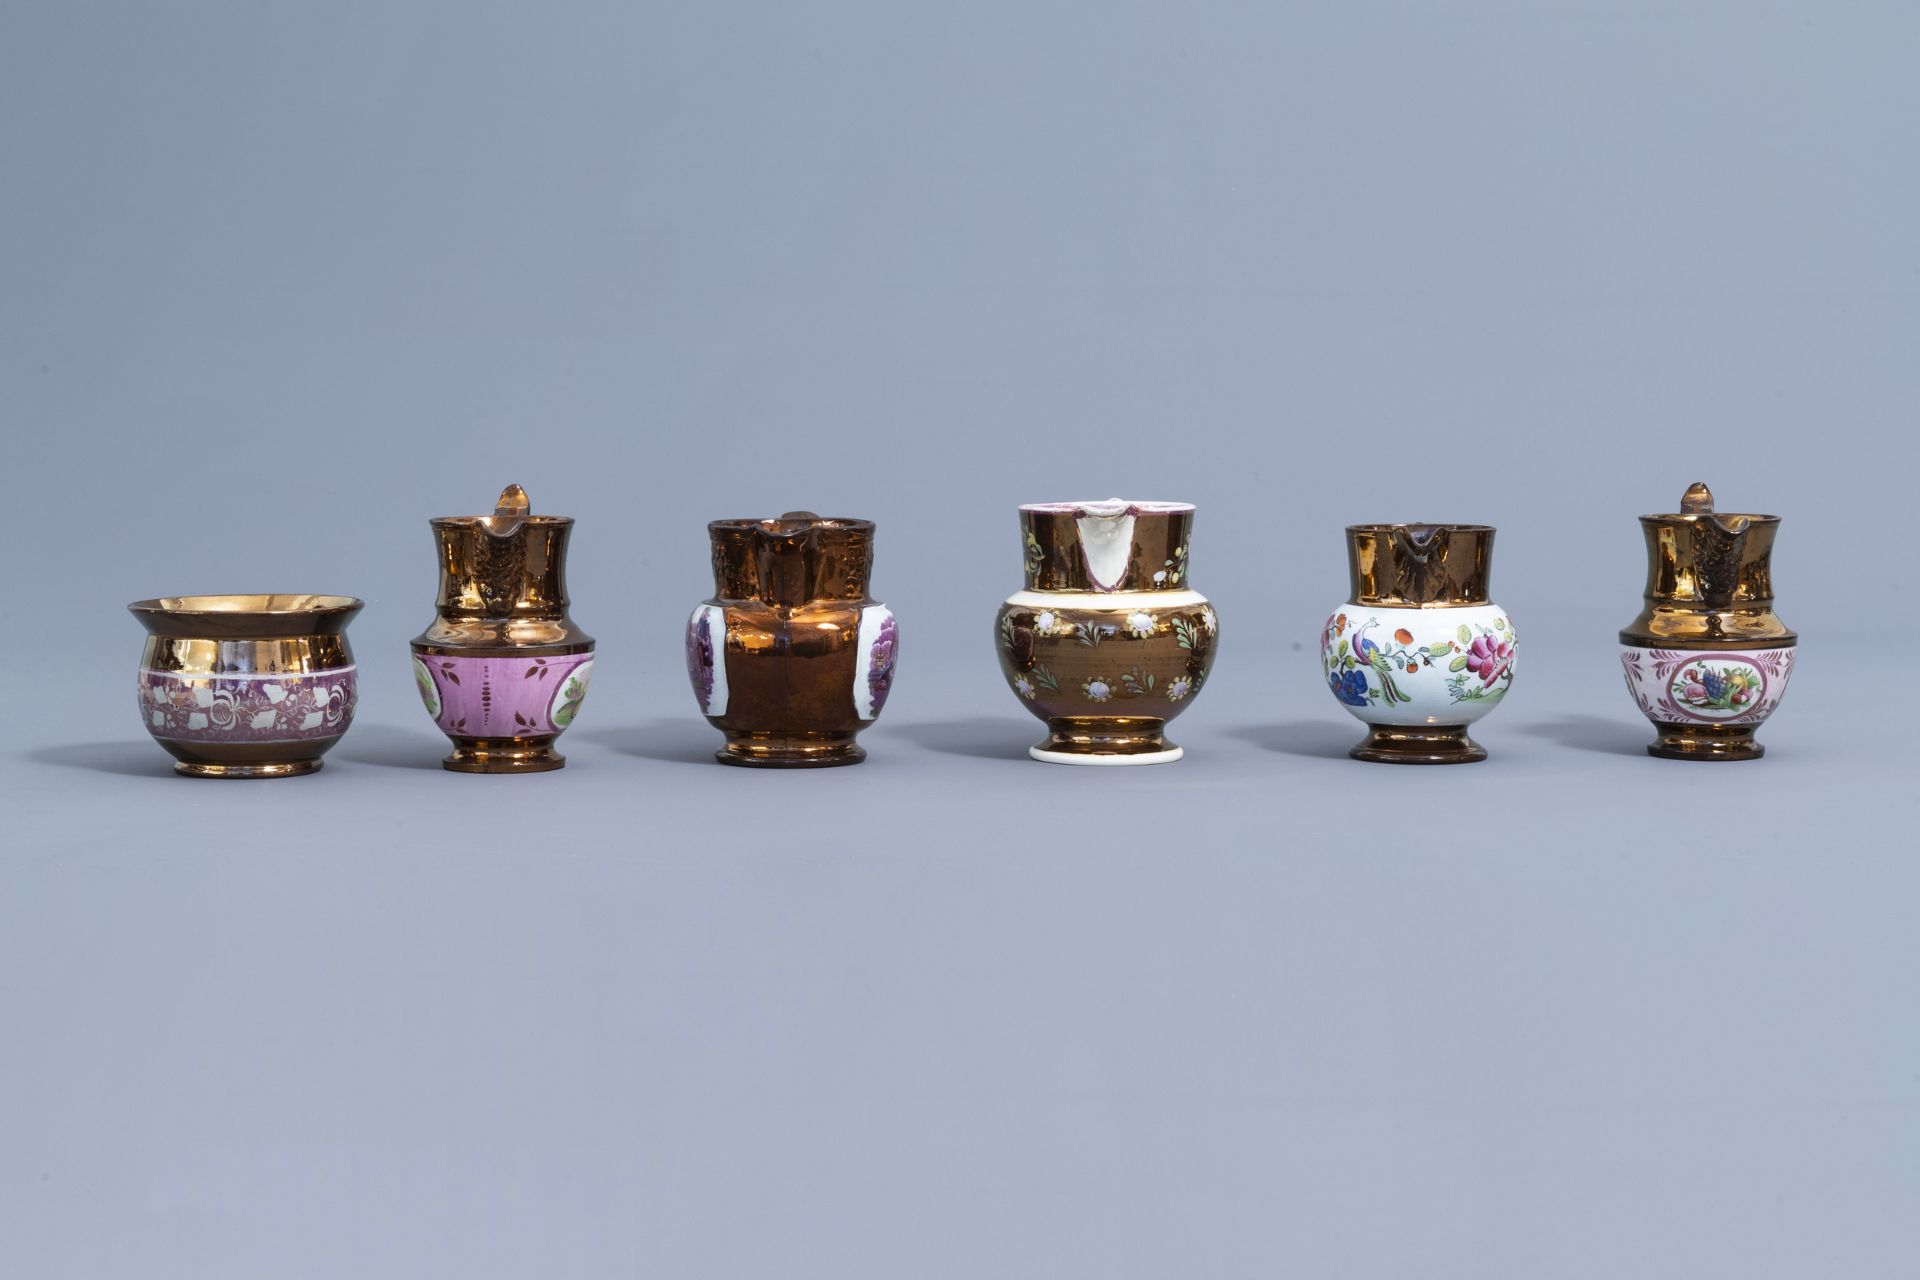 A varied collection of English lustreware items, 19th C. - Image 34 of 44